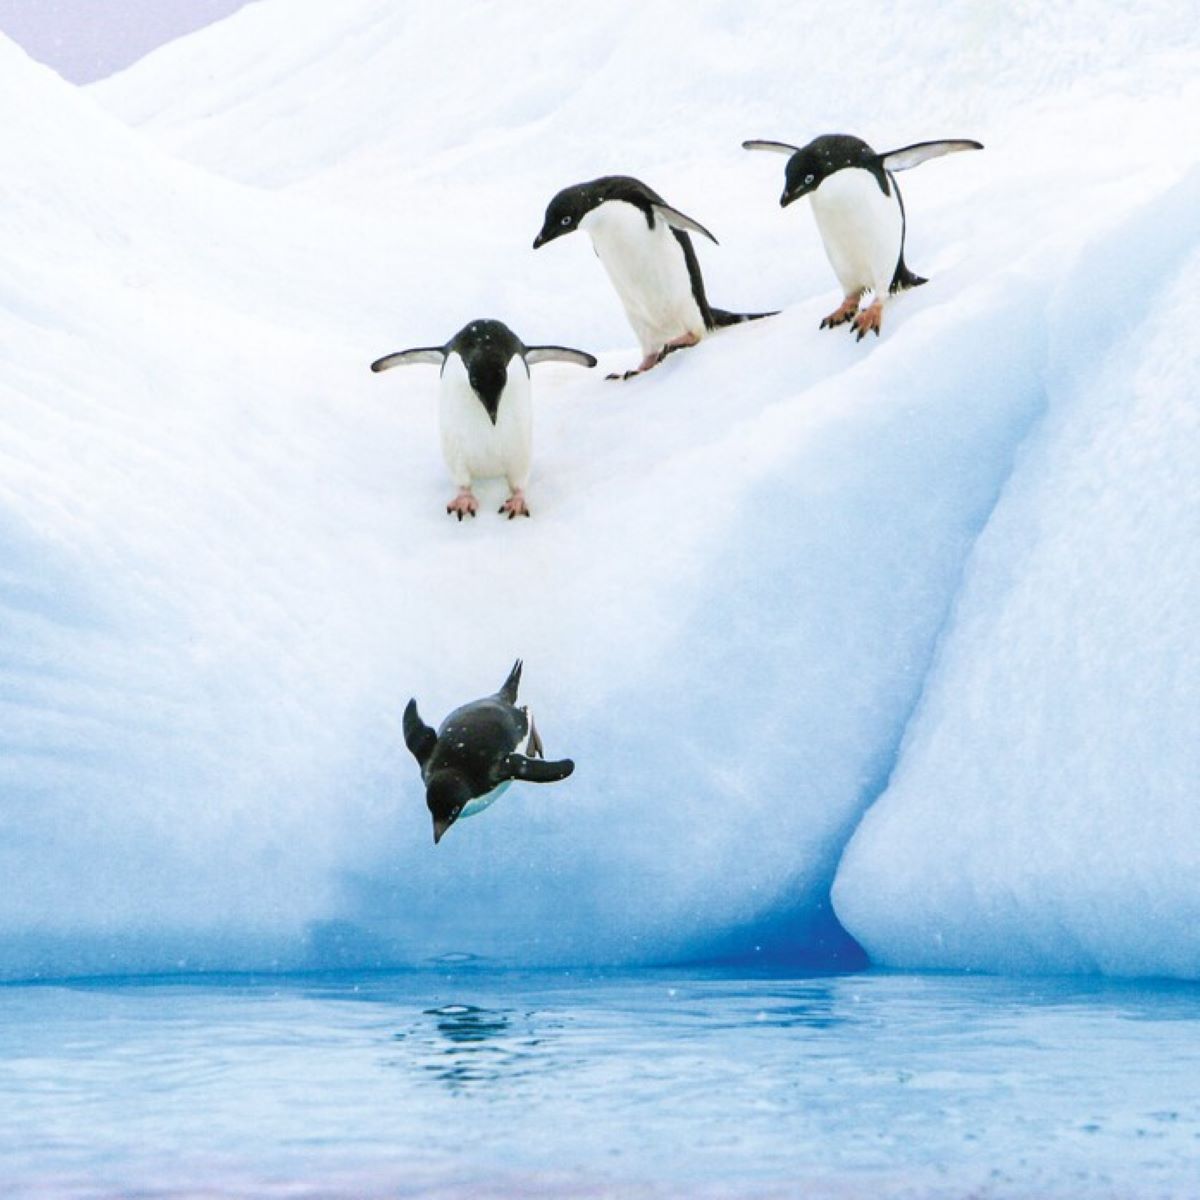 Penguins sliding down from the ice into the ocean